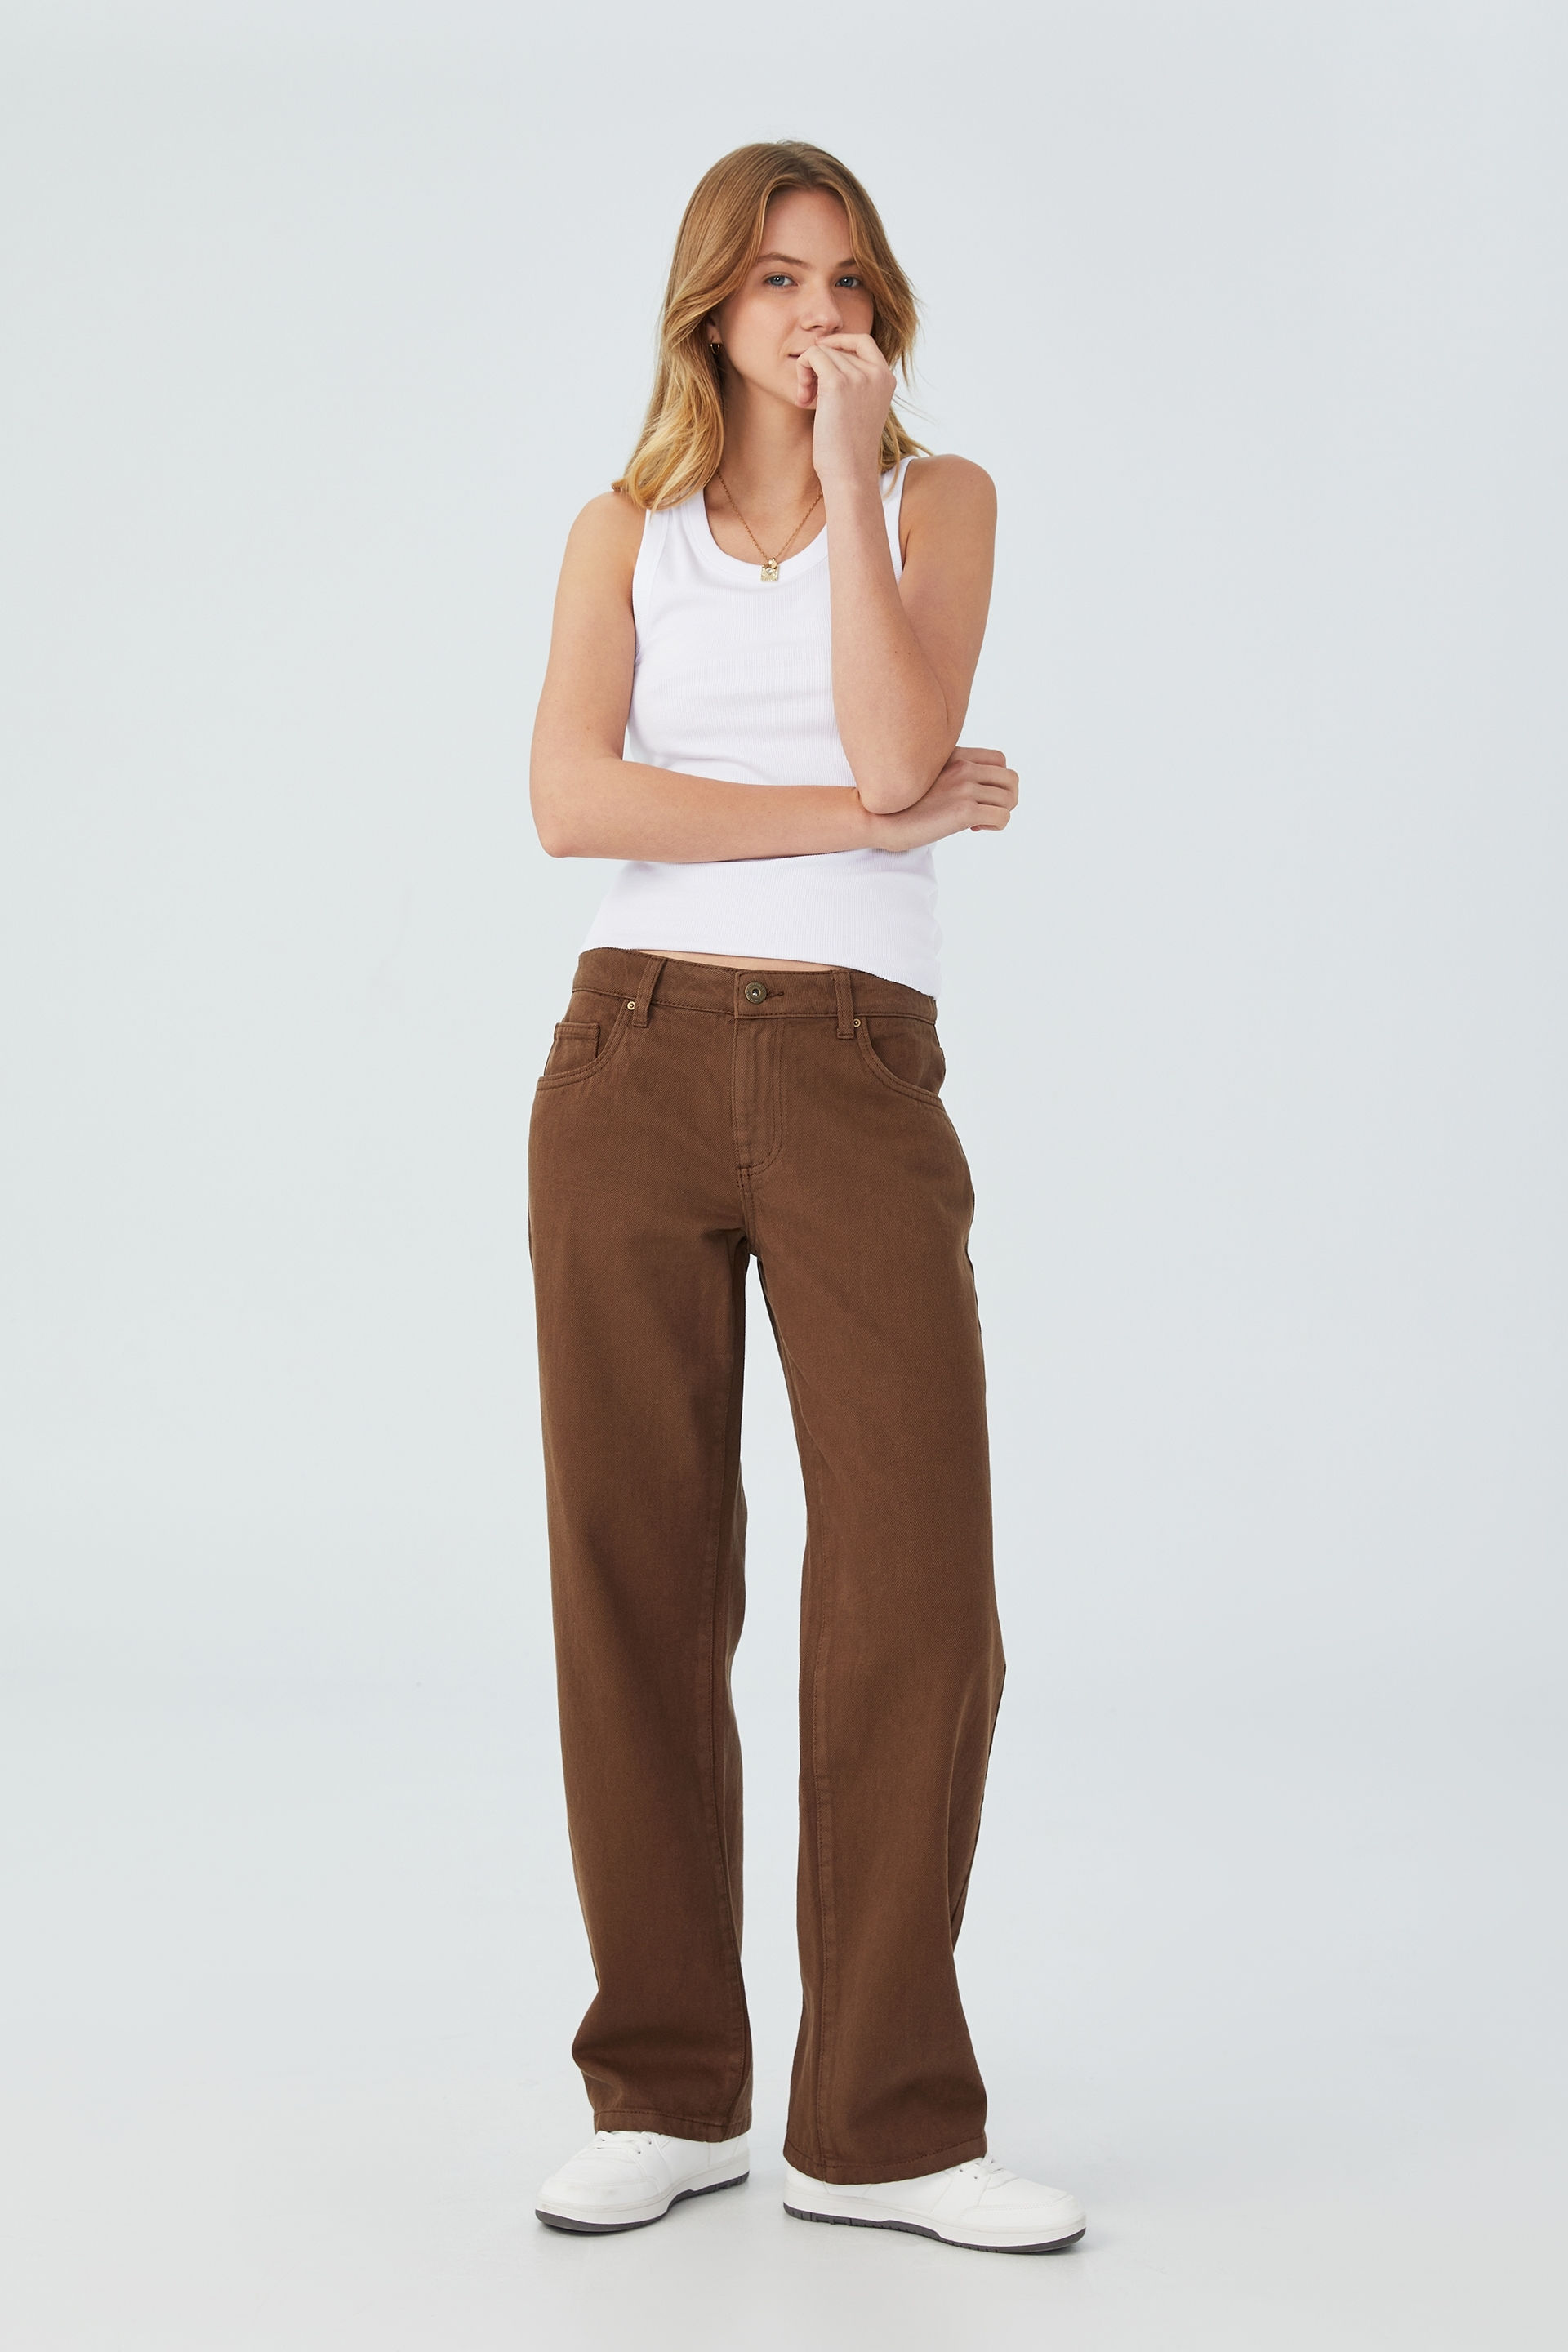 Cotton On Women - Low Rise Straight Jean - Chocolate